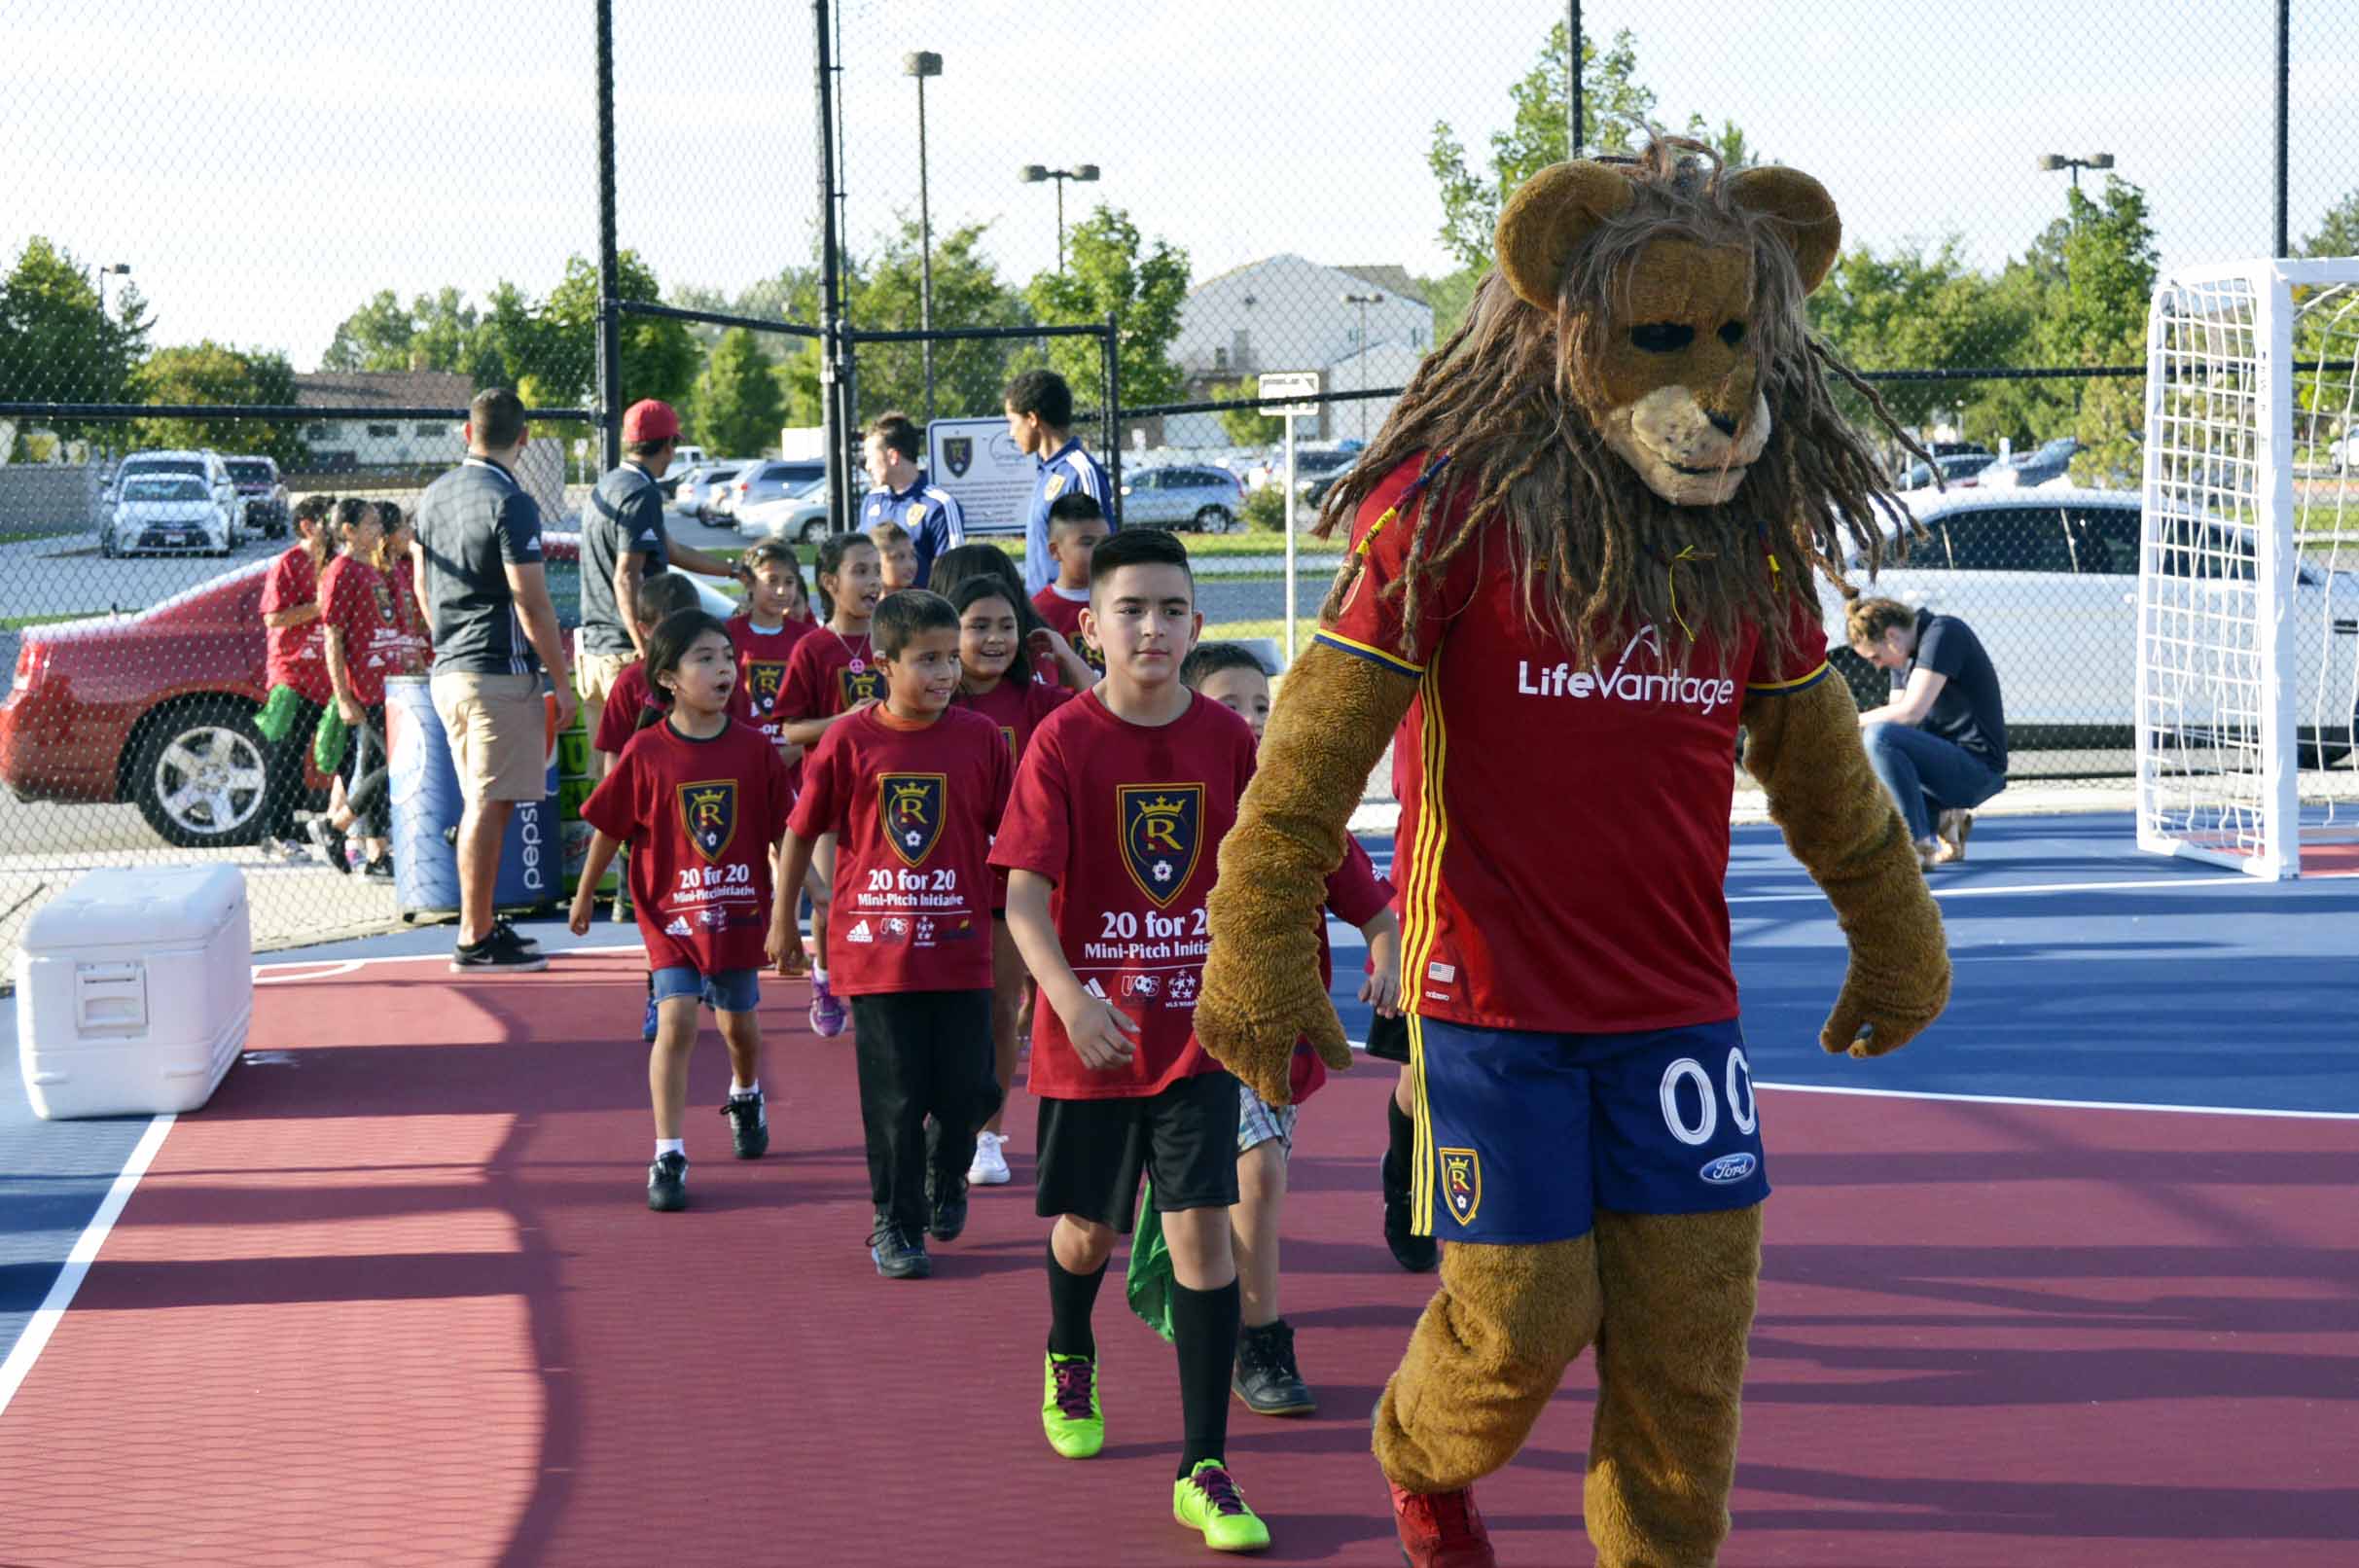 Granger Elementary is home to new Real Salt Lake ‘mini-pitch’